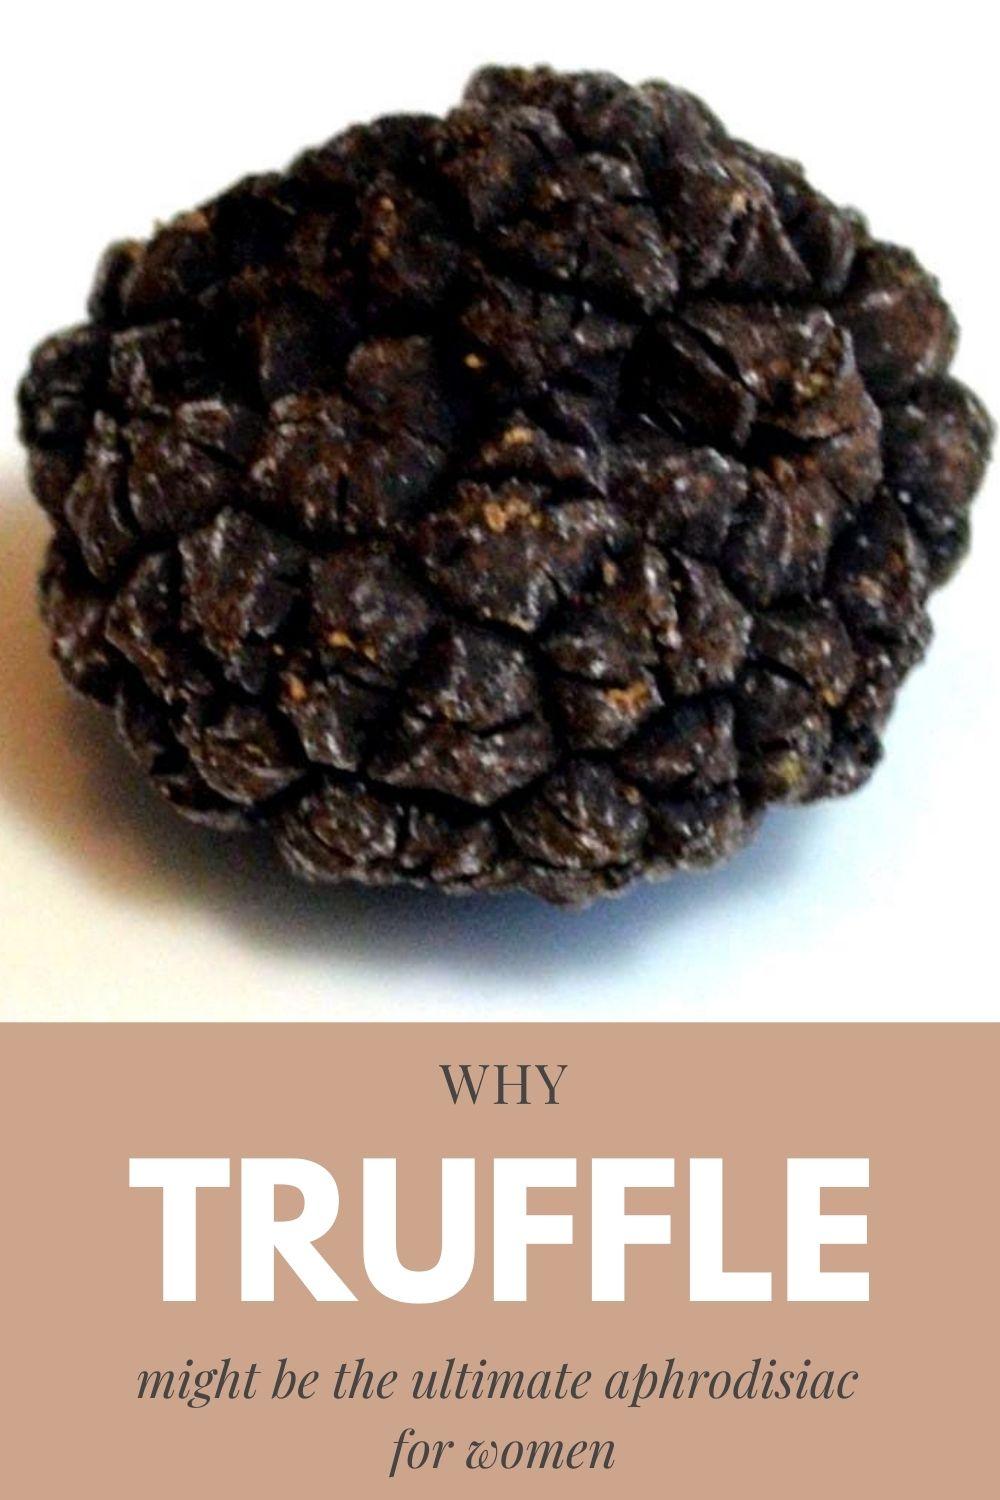 Why truffle is the aphrodisiac for women graphic